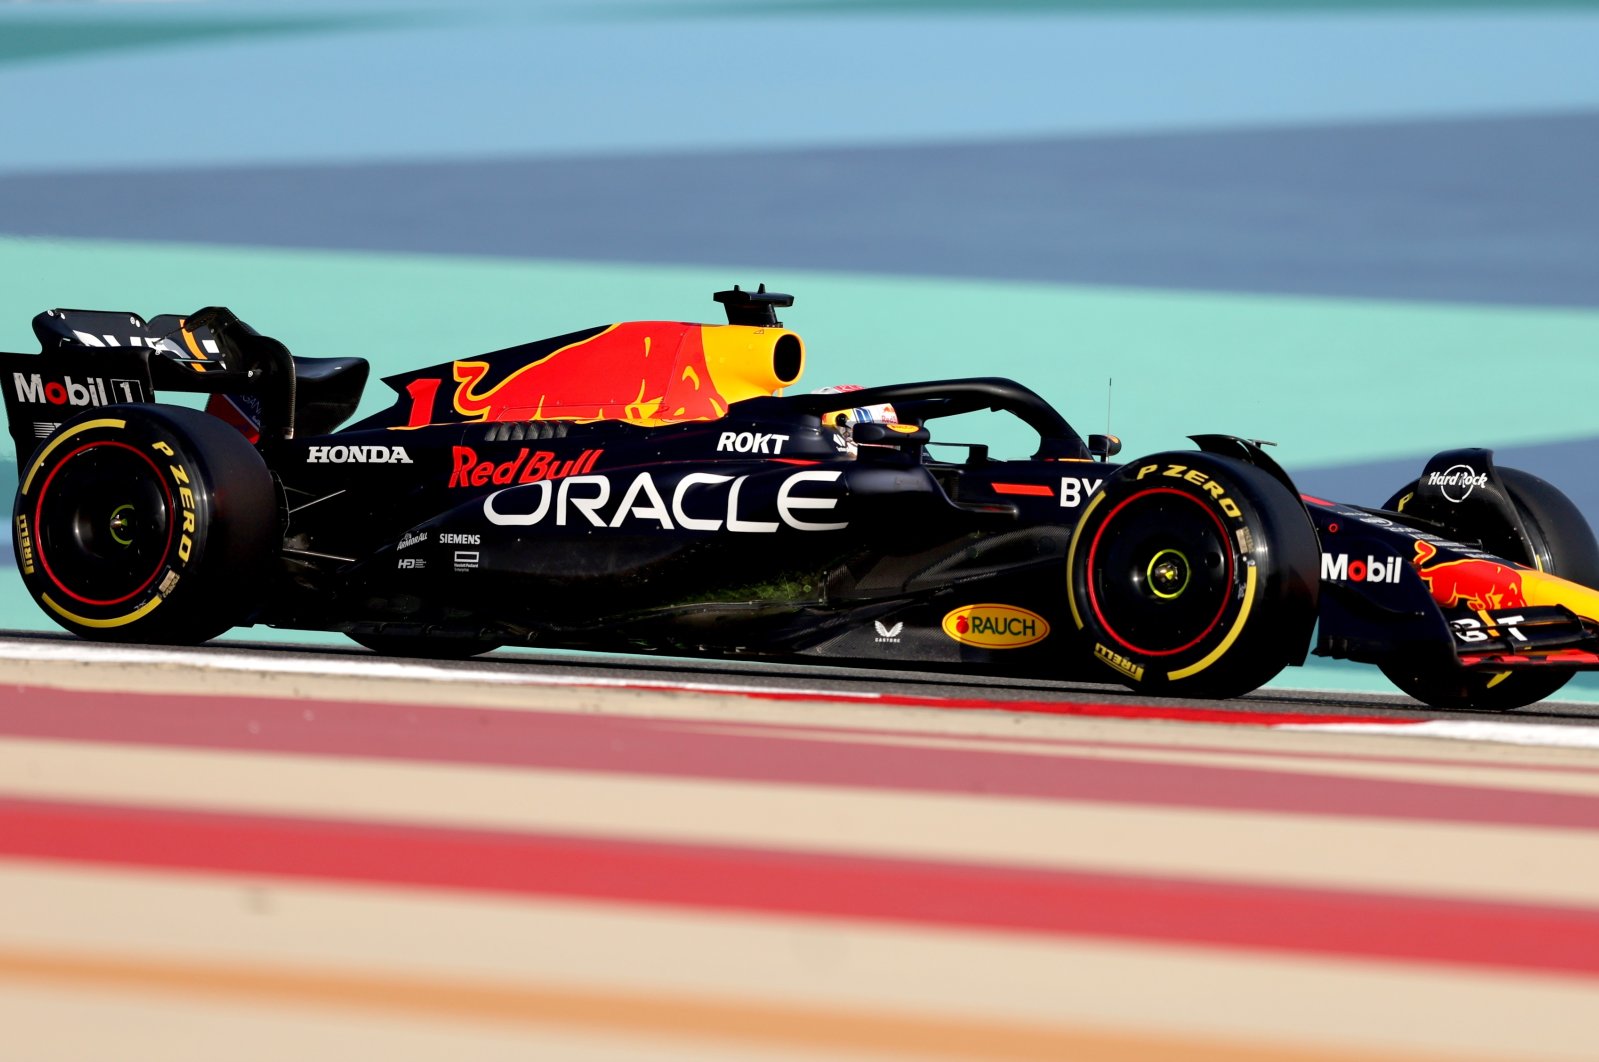 Dutch Formula One driver Max Verstappen of Red Bull Racing in action during the preseason test sessions at the Sakhir circuit, Manama, Bahrain, Feb. 23 2023. (EPA Photo)